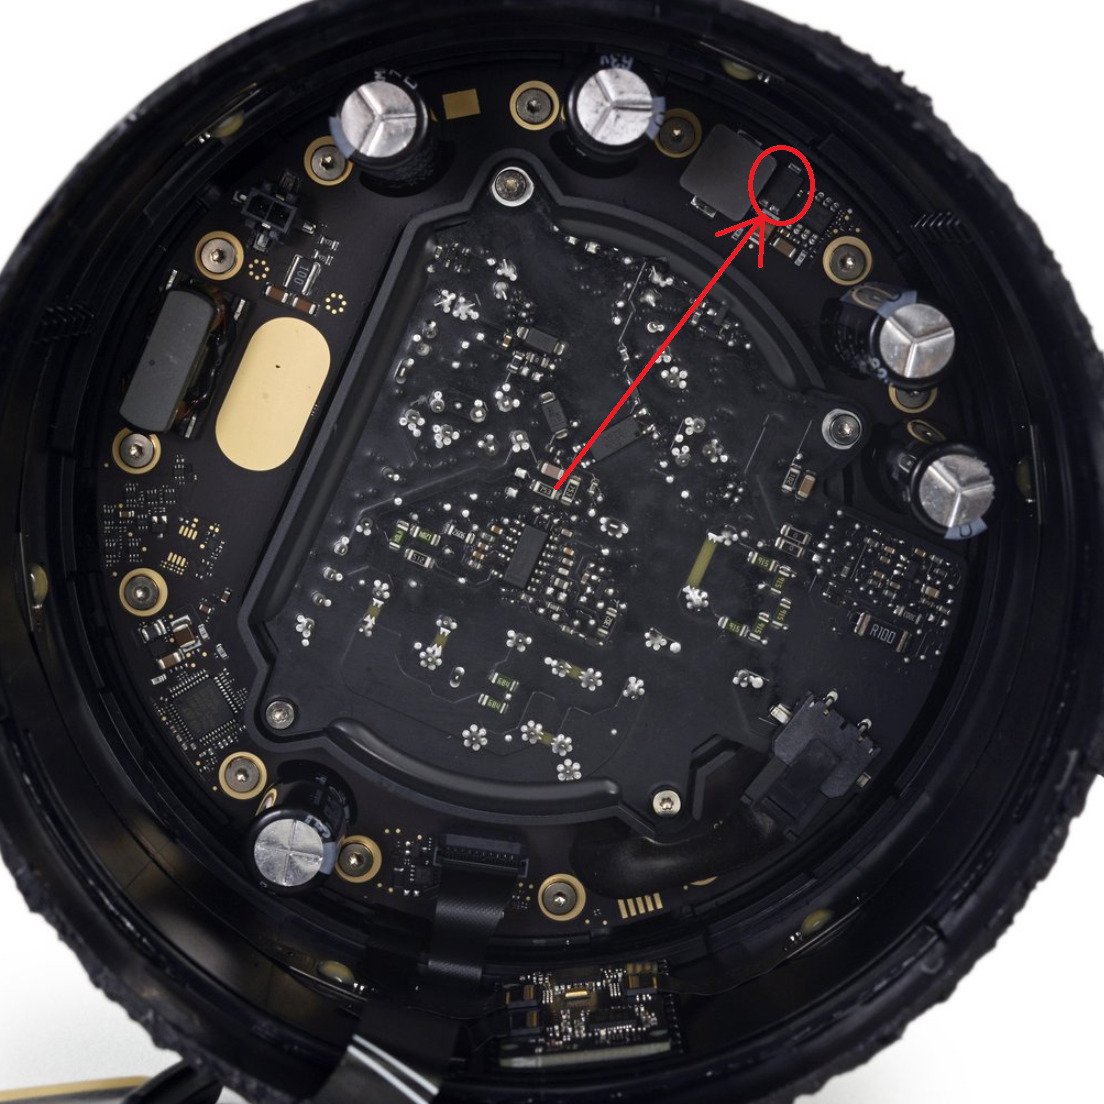 location of diode in homepod